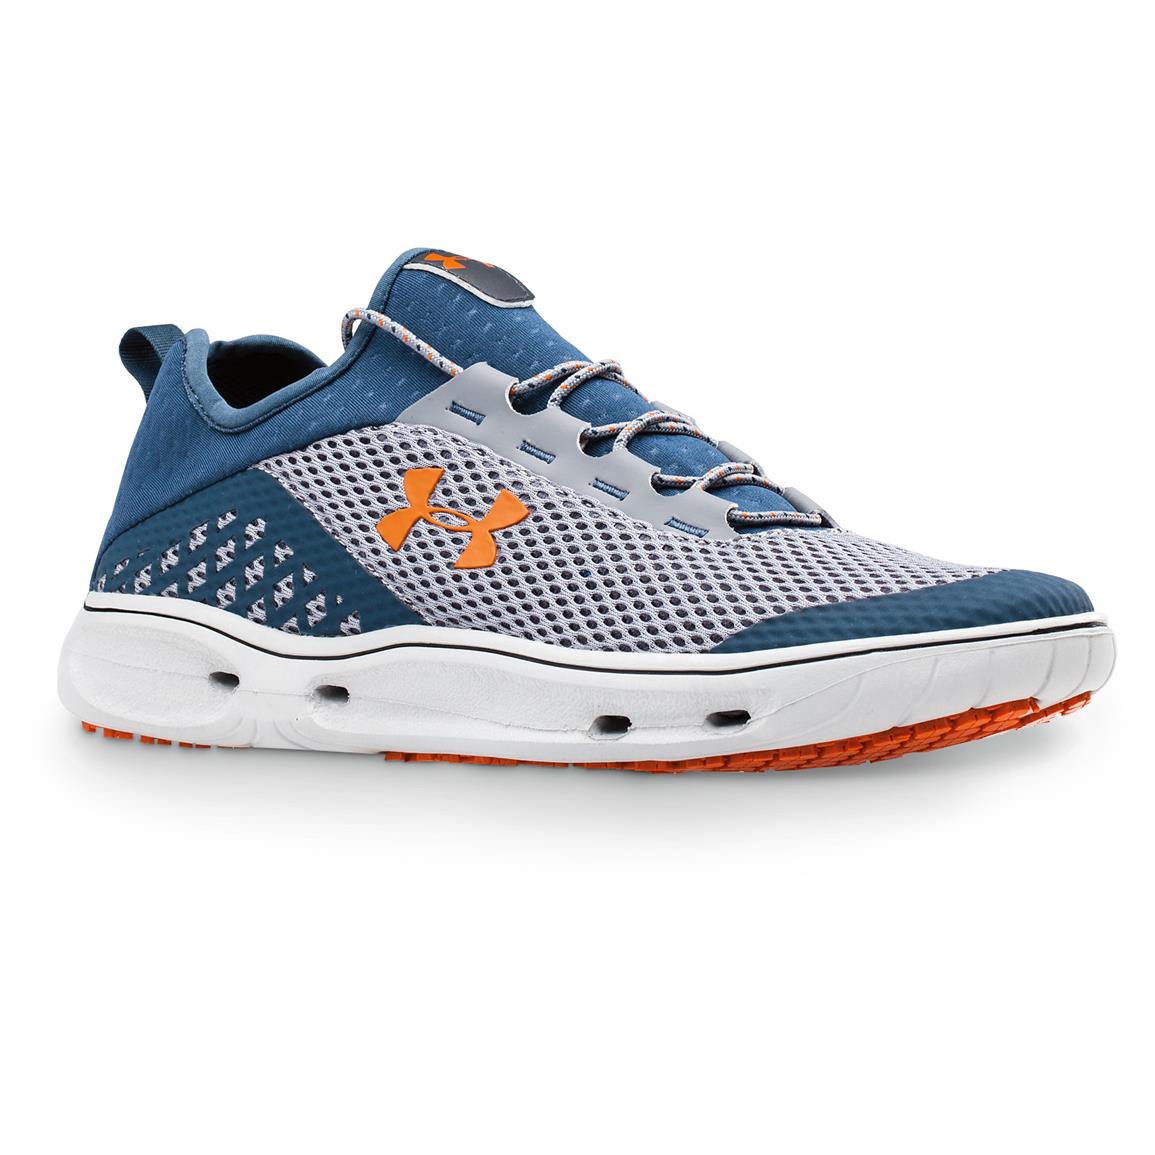 blue and orange under armour shoes